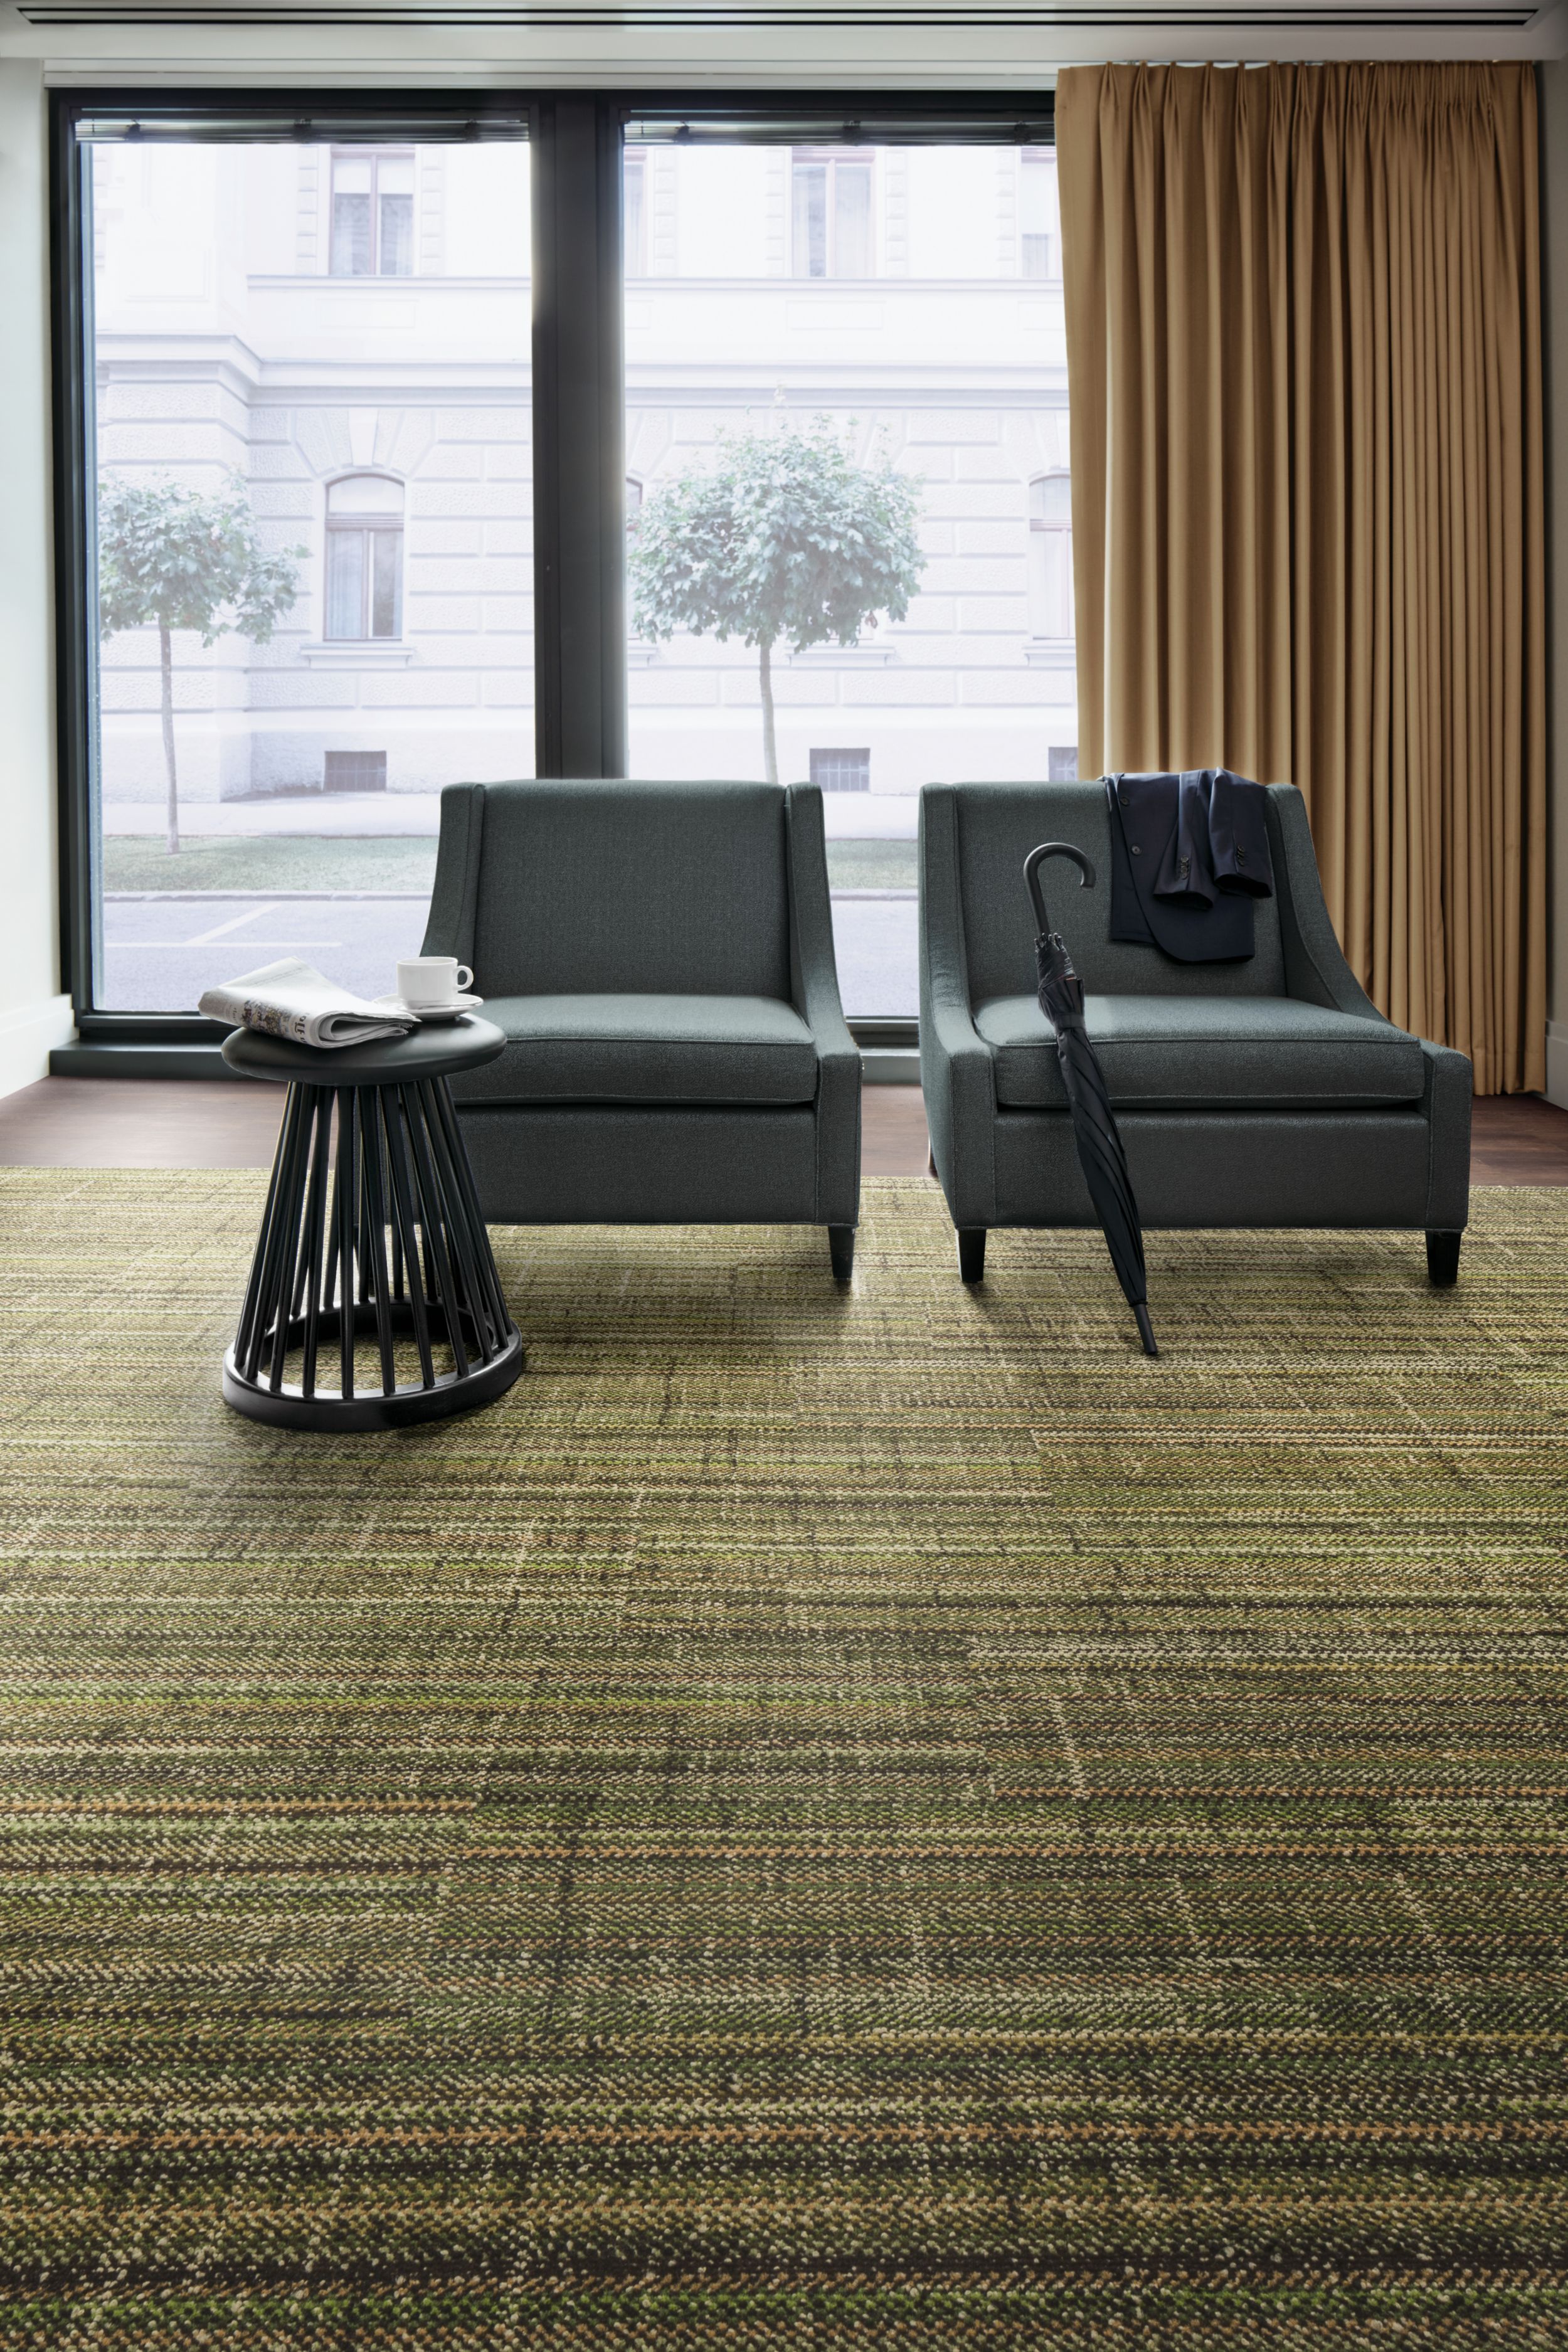 Interface French Seams plank carpet tile and Natural Woodgrains LVT with two chairs numéro d’image 7